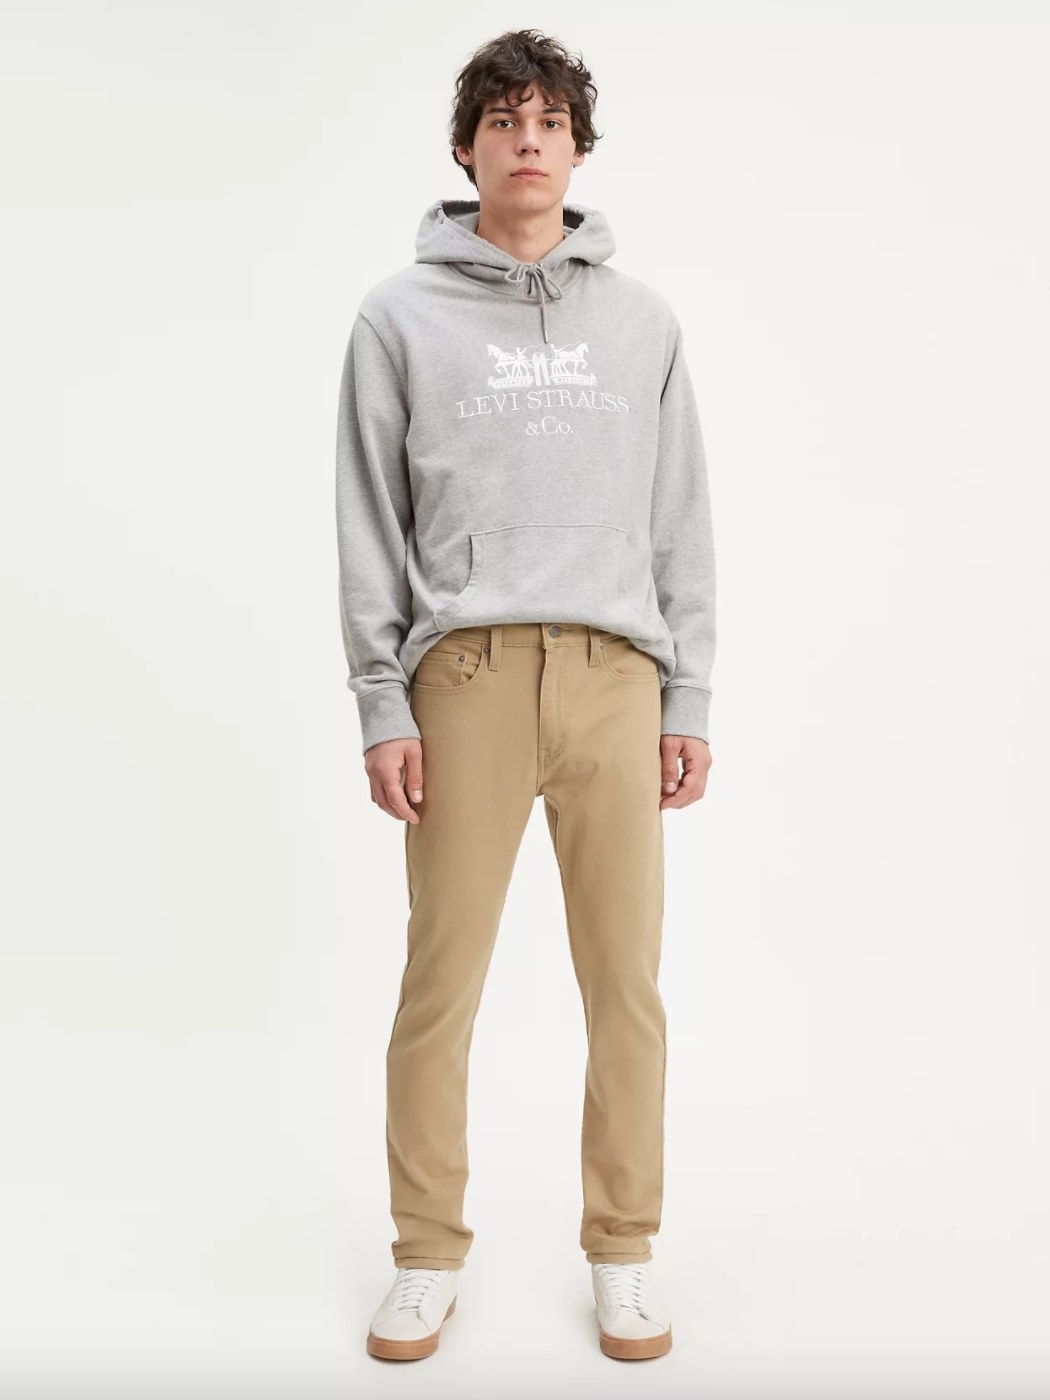 A model wearing the khaki pants and a gray hoodie